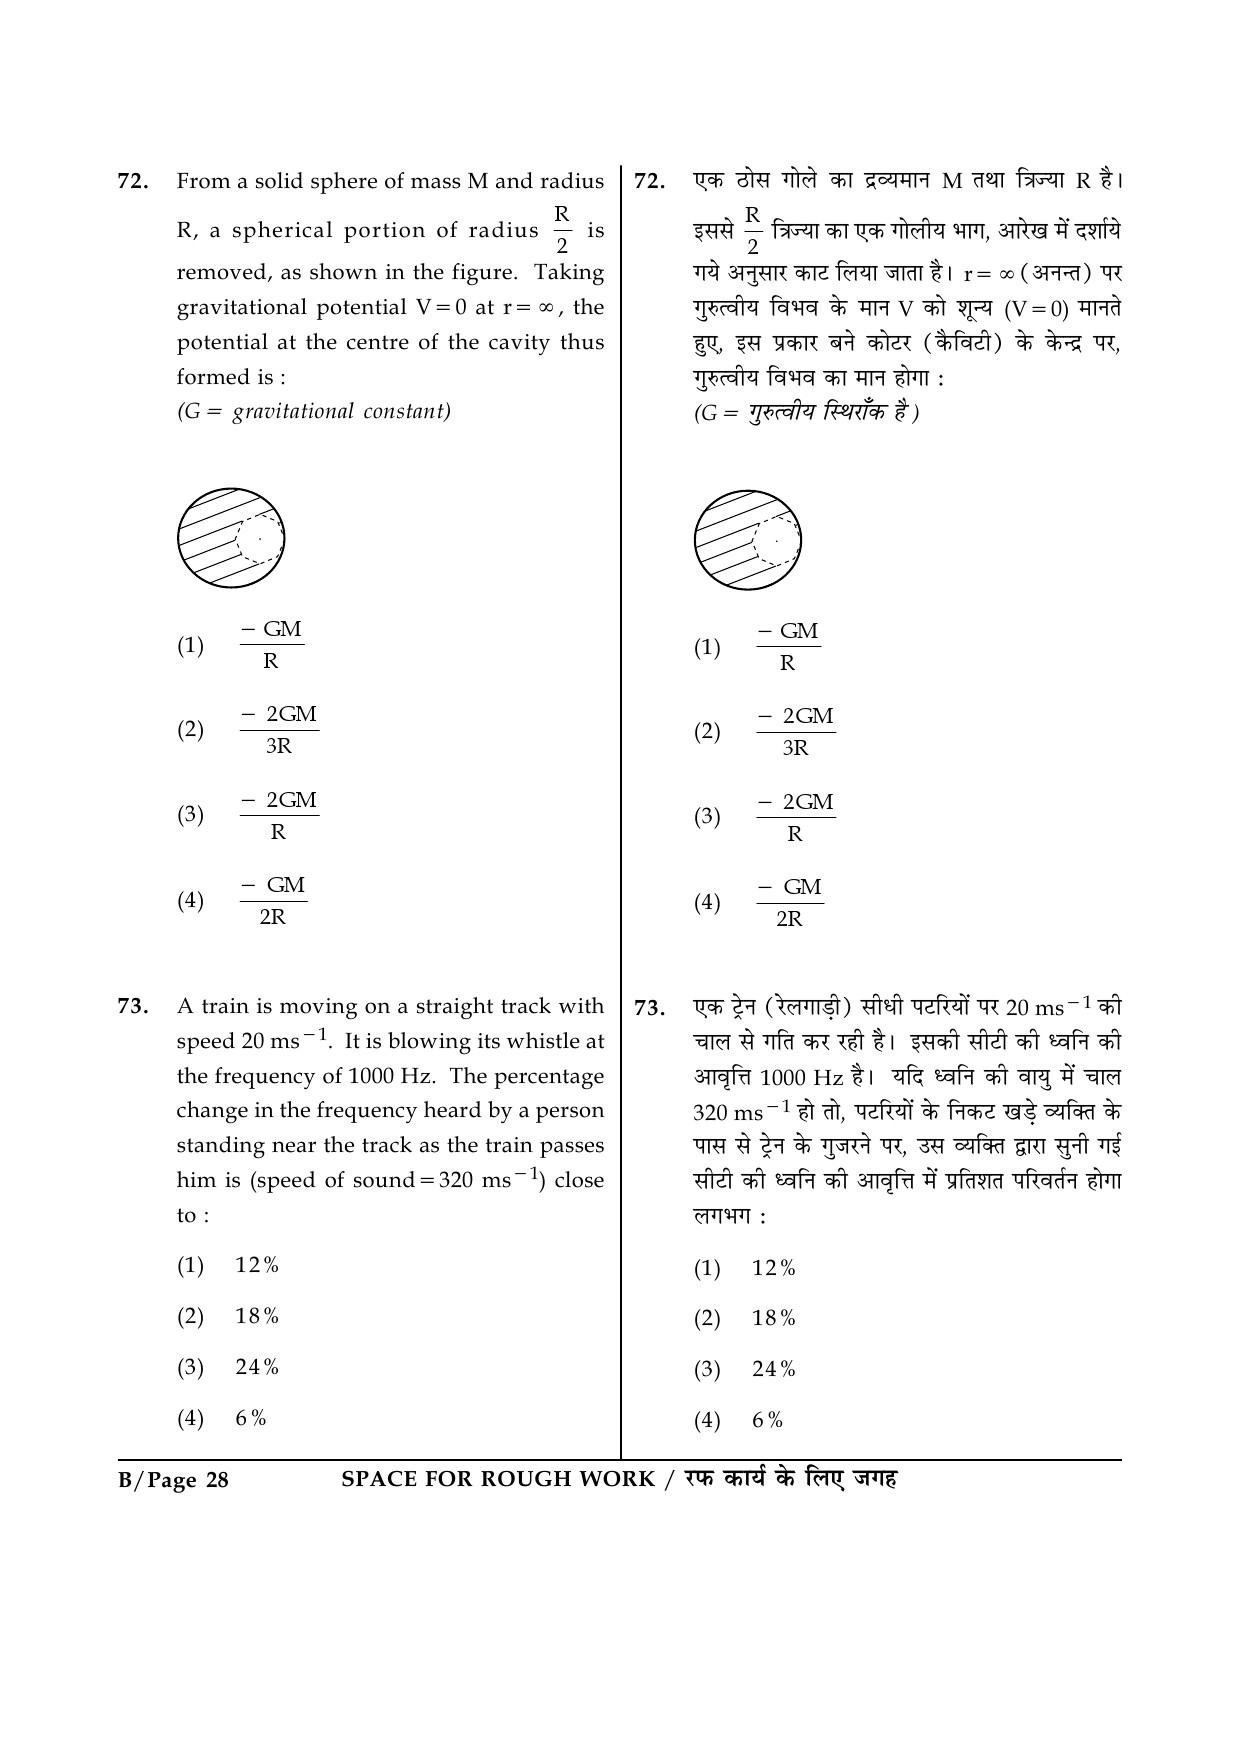 JEE Main Exam Question Paper 2015 Booklet B 28